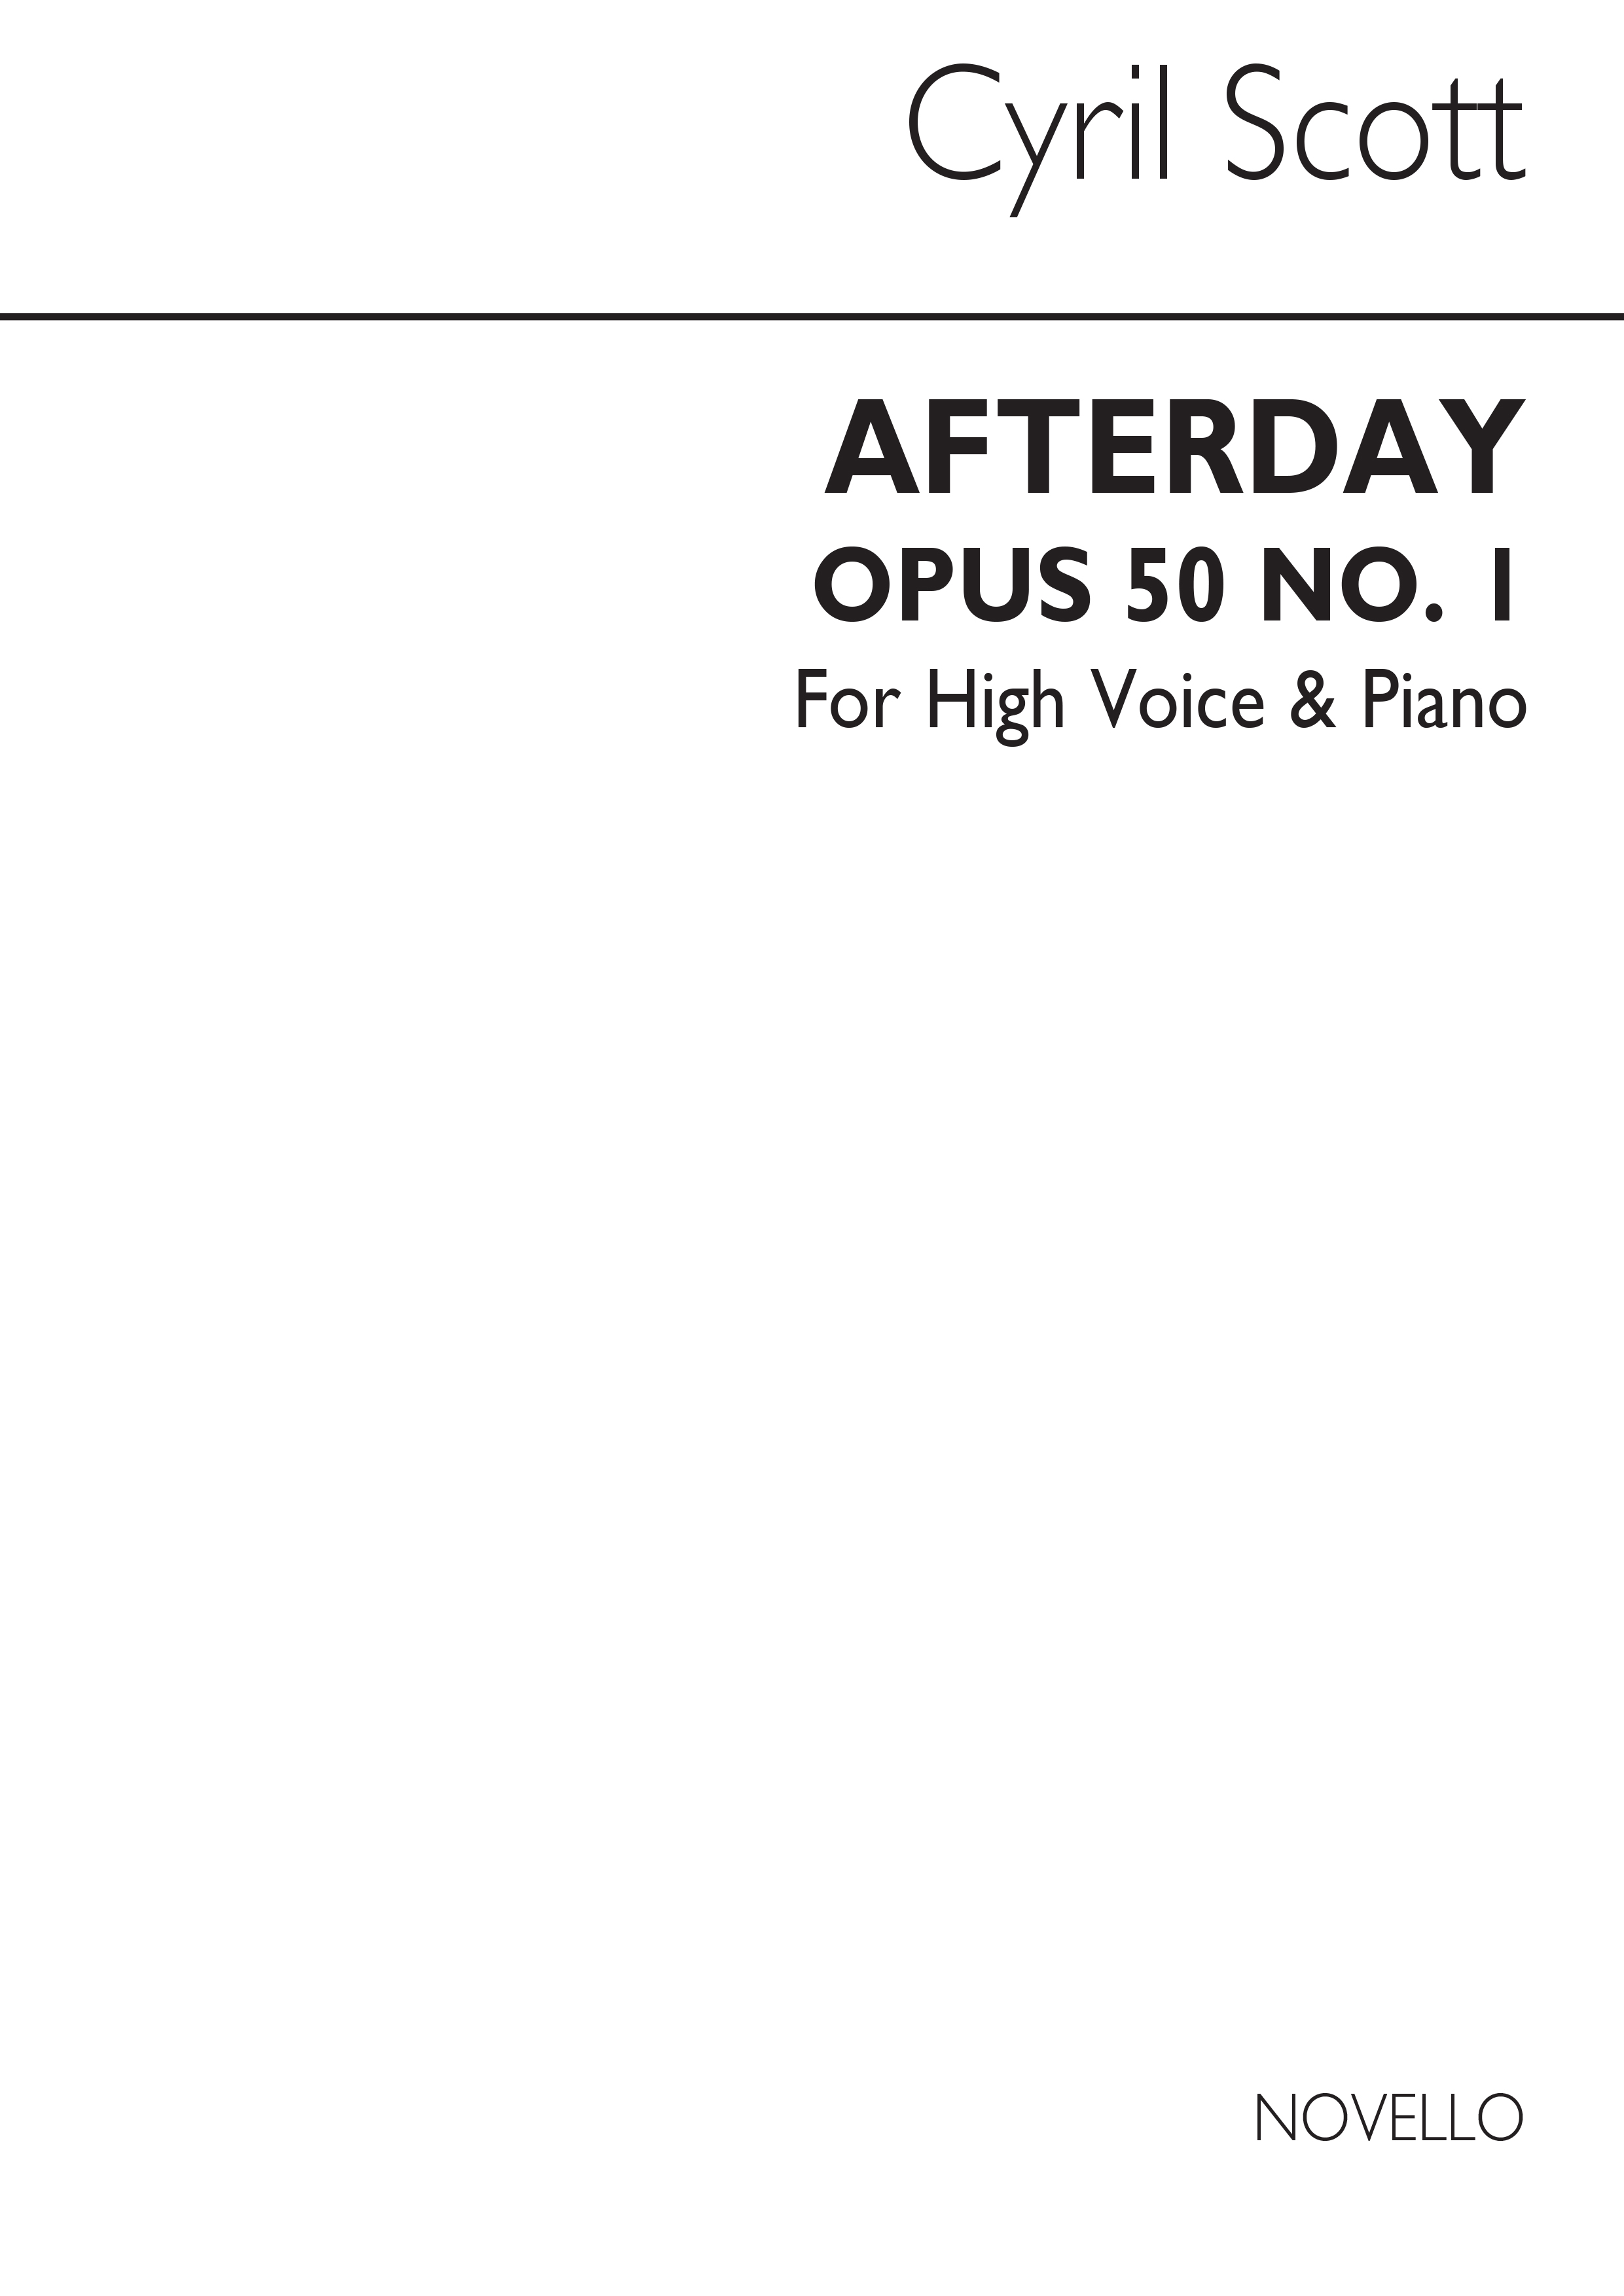 Cyril Scott: Afterday Op50 No.1-high Voice/Piano (Key-c)